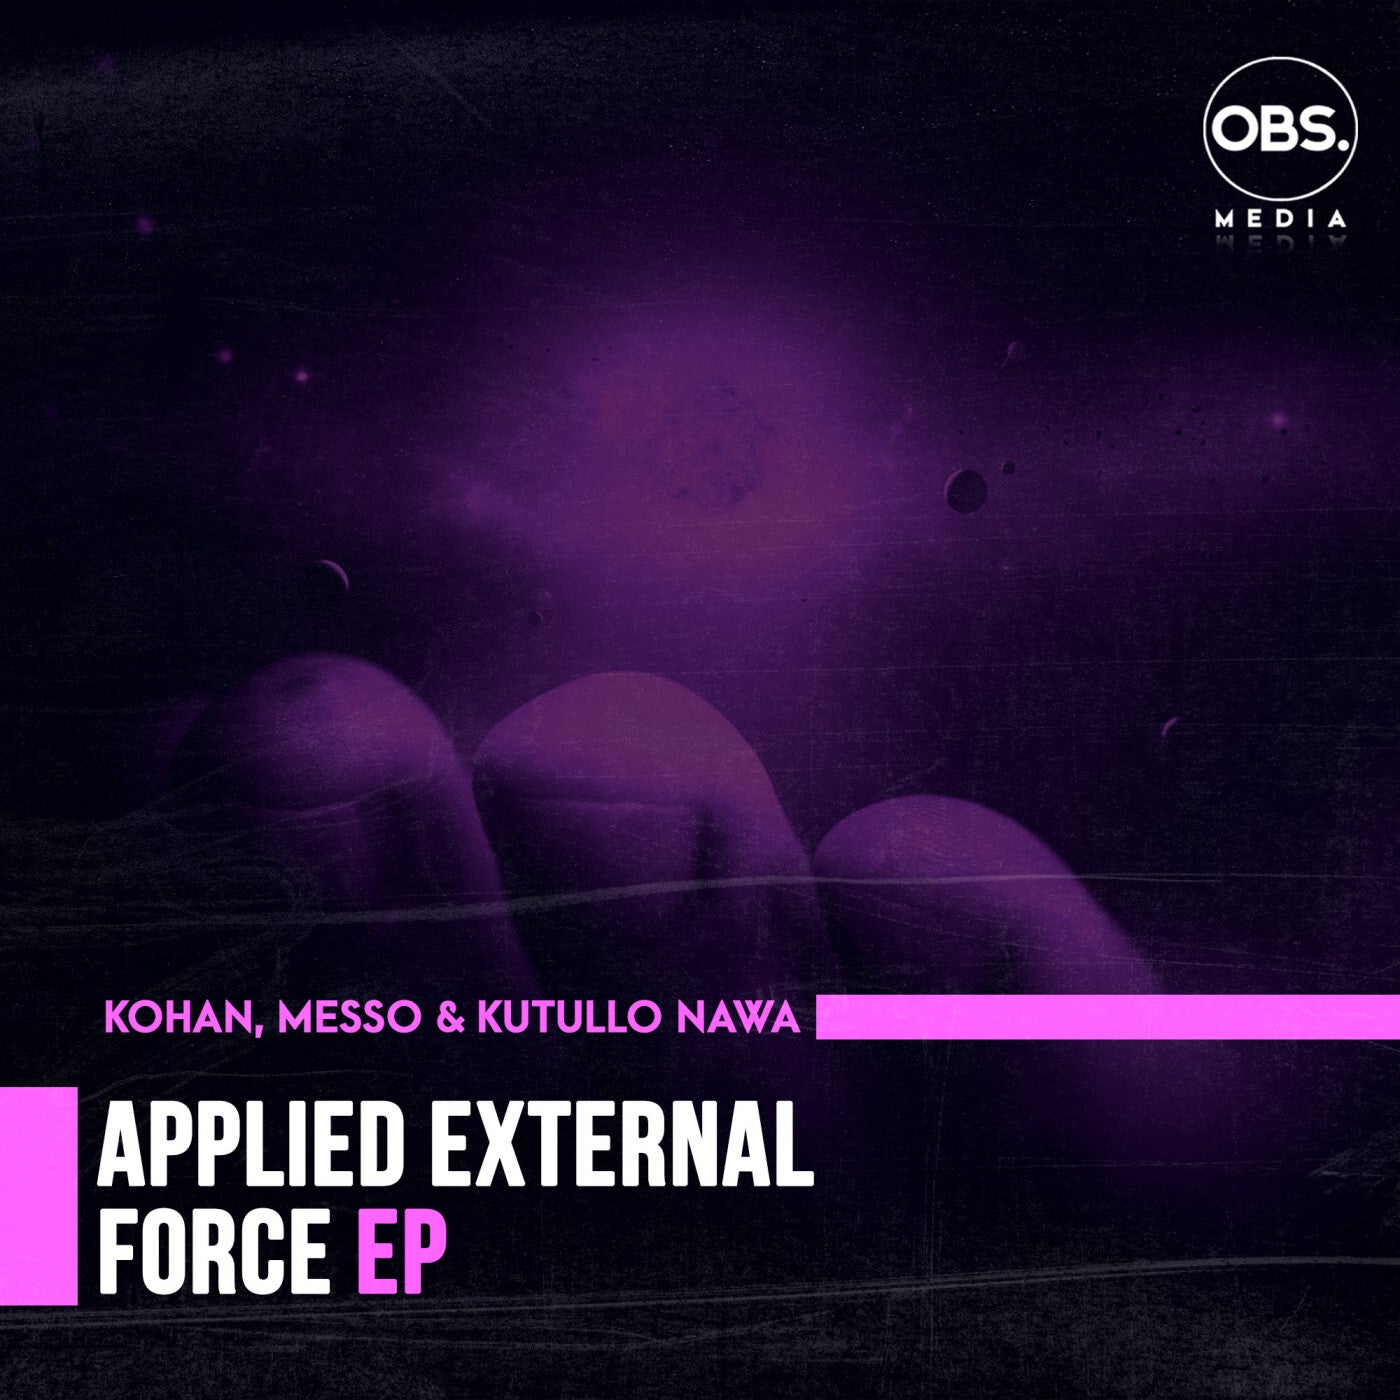 Applied External Force EP